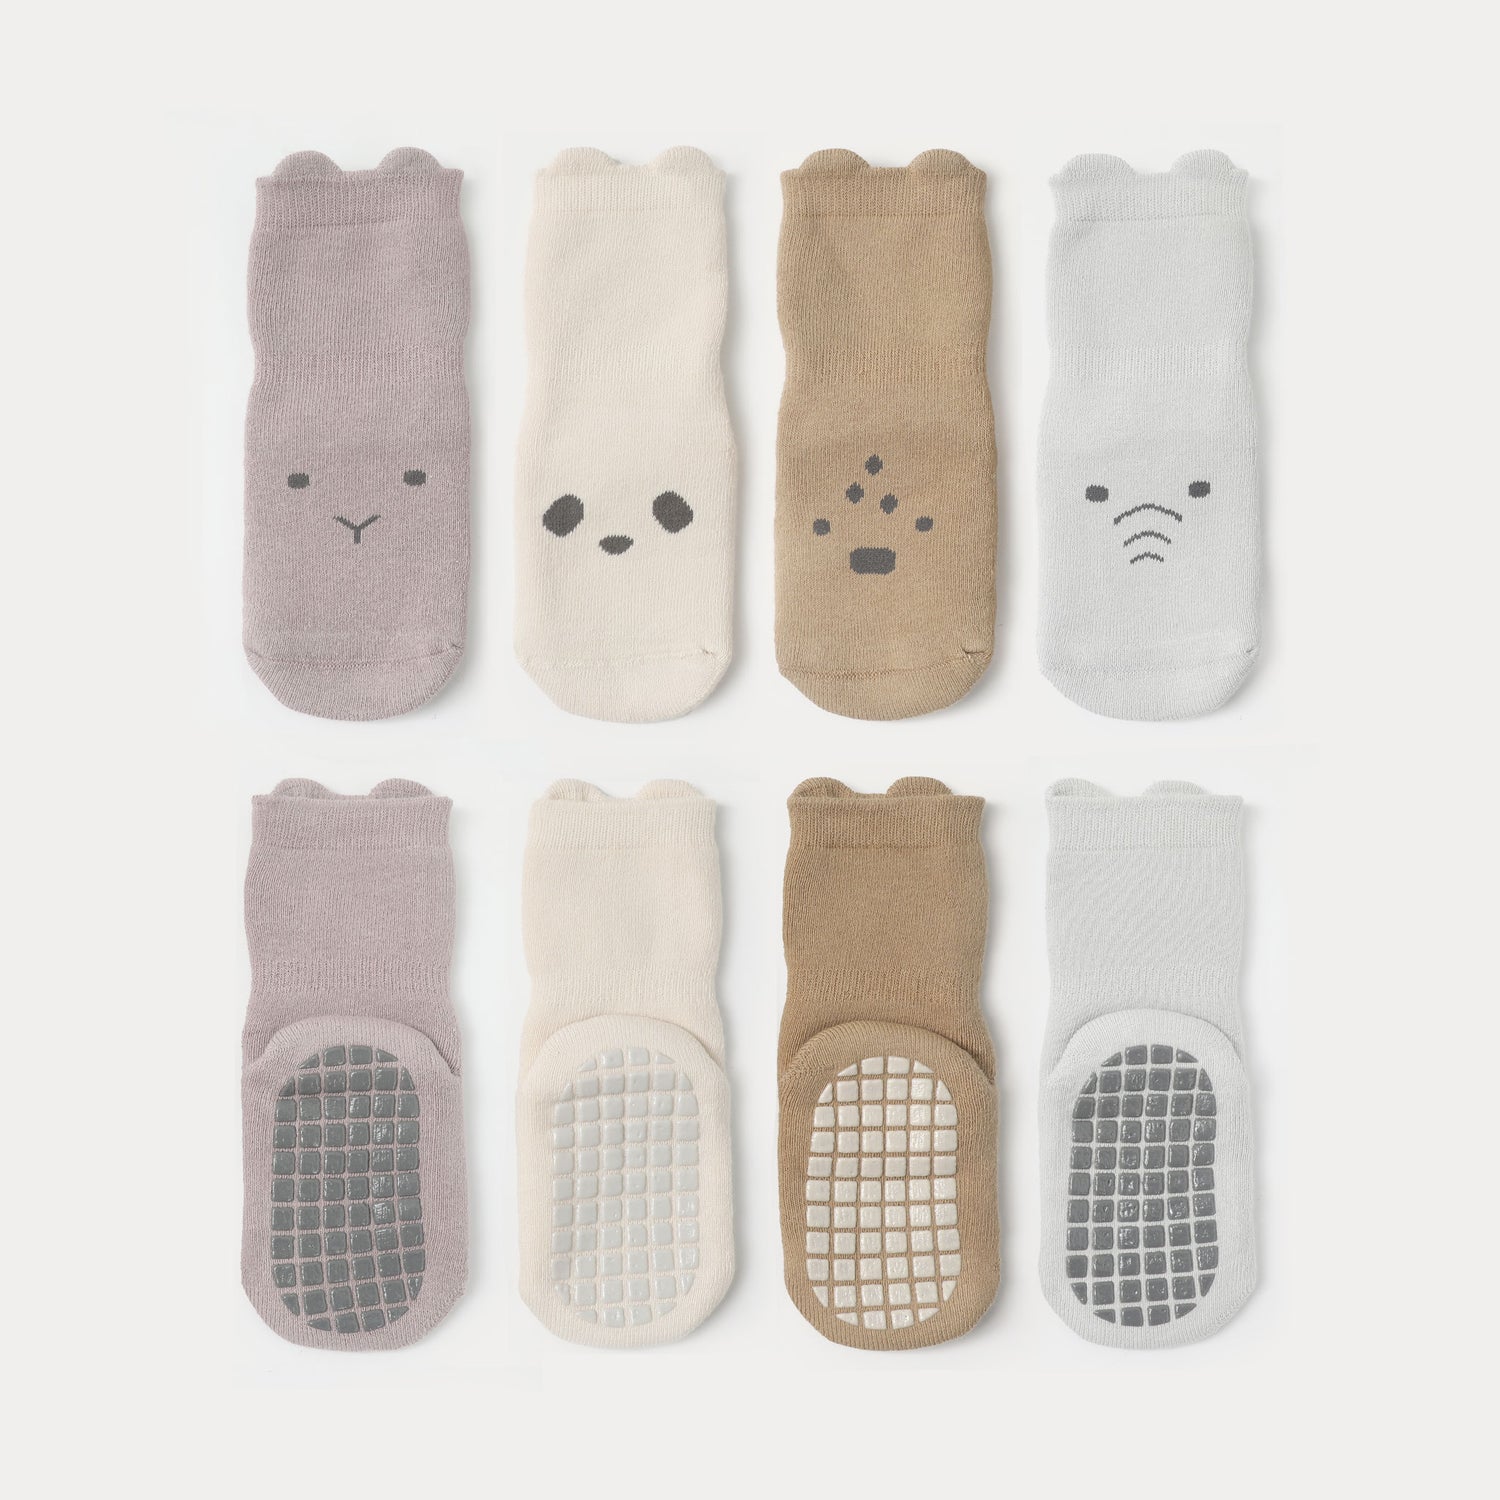 Expertly designed socks for babies that promise to stay on, reducing the hassle for parents.